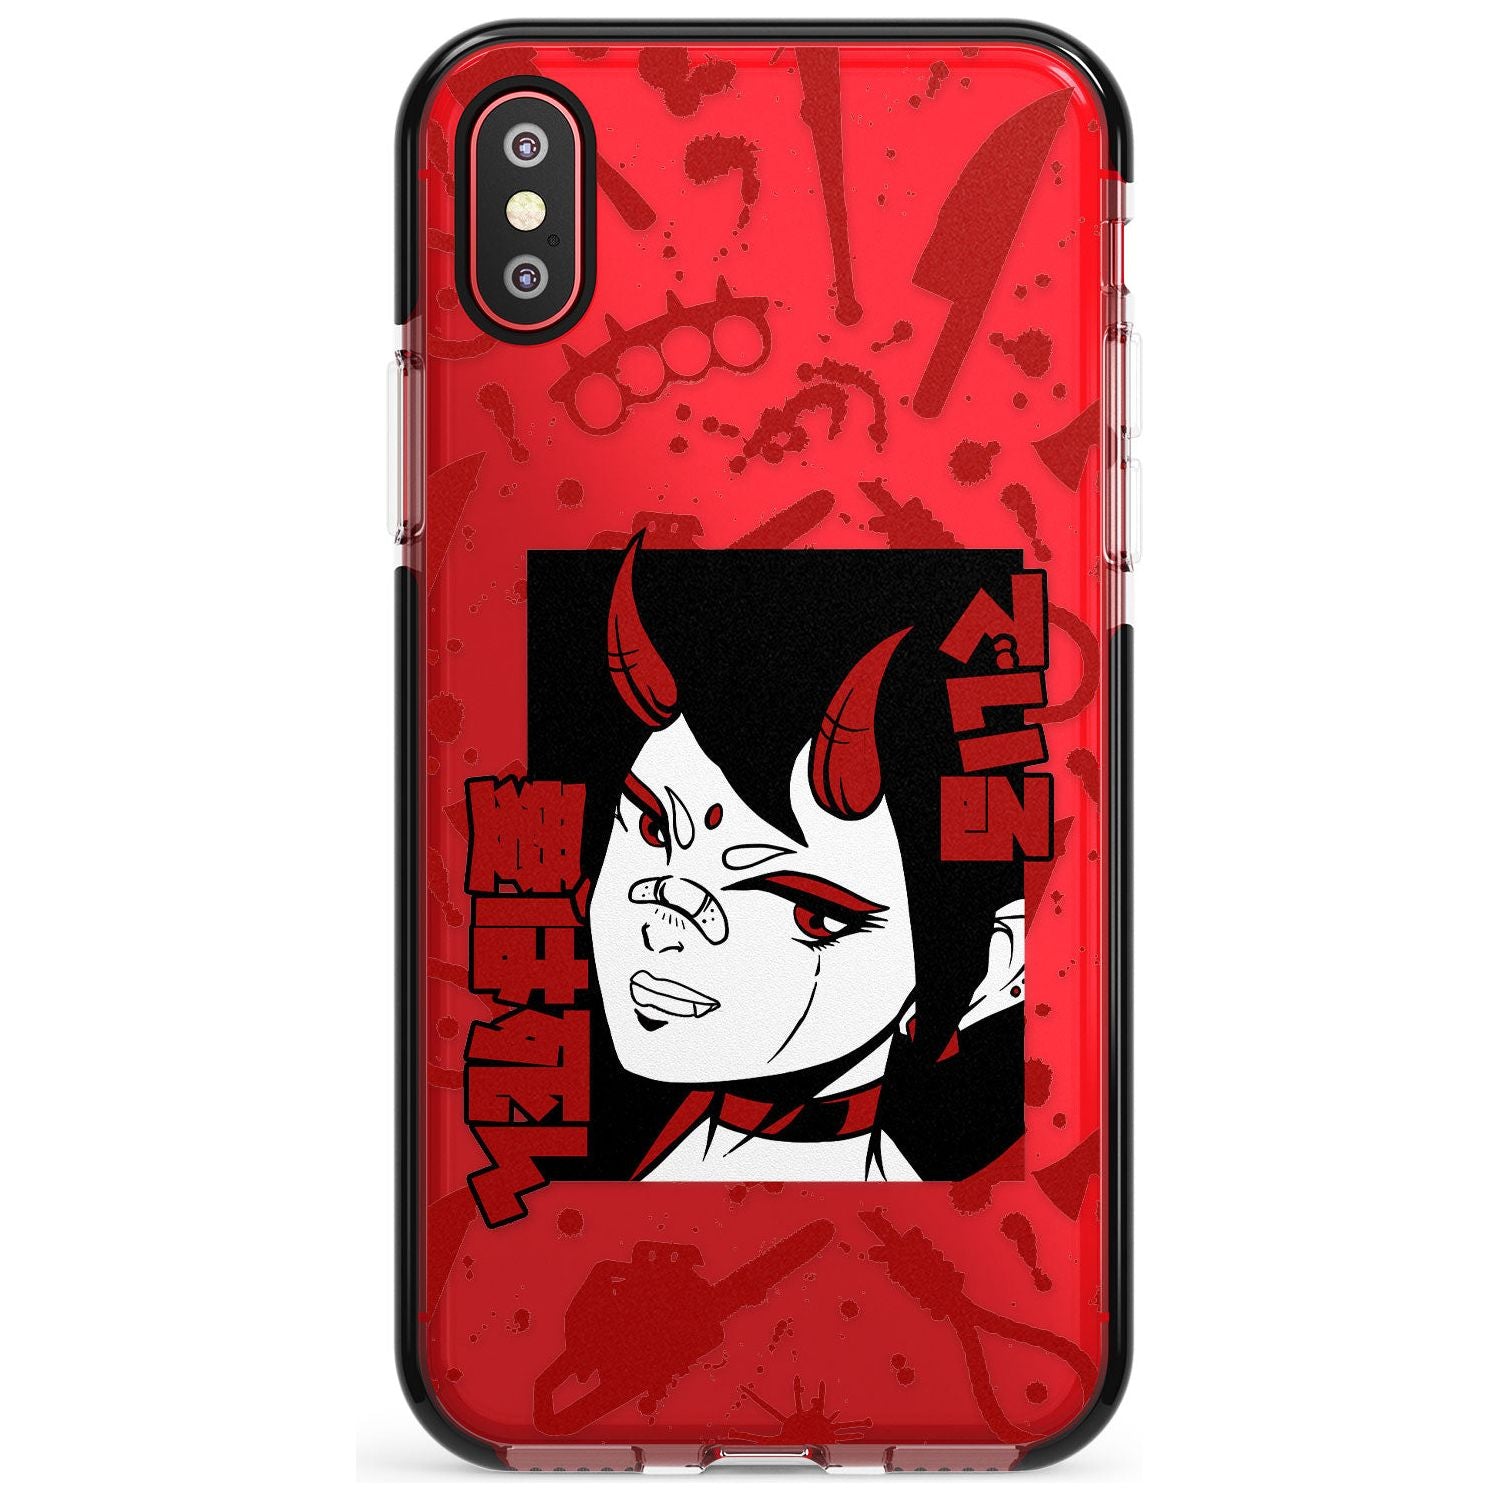 She's a Devil Black Impact Phone Case for iPhone X XS Max XR